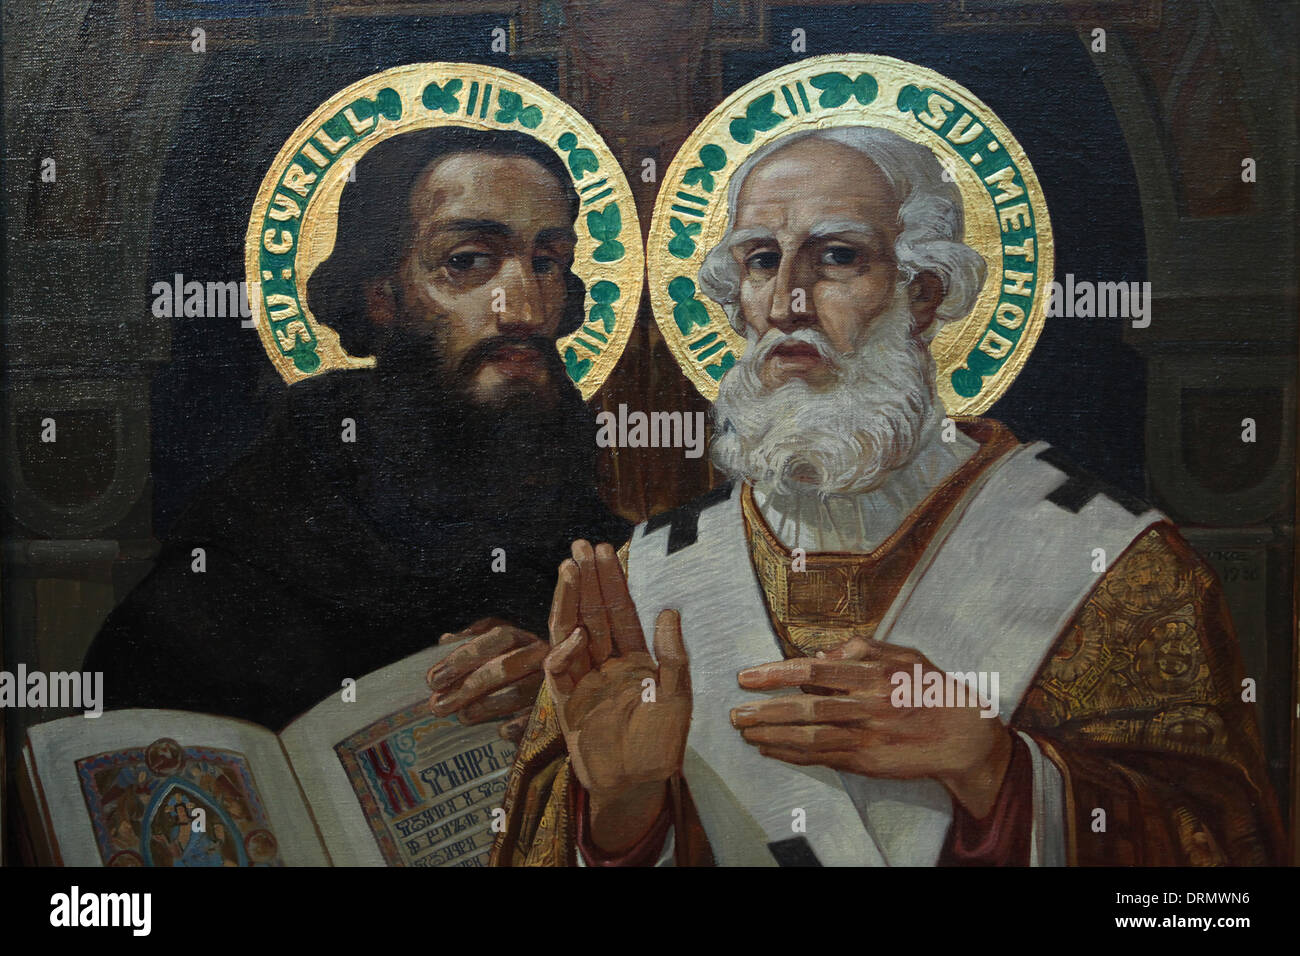 Painting 'Saints Cyril and Methodius' (1937) by Jano Kohler at the exhibition 'Saints Cyril and Methodius' in Prague. Stock Photo